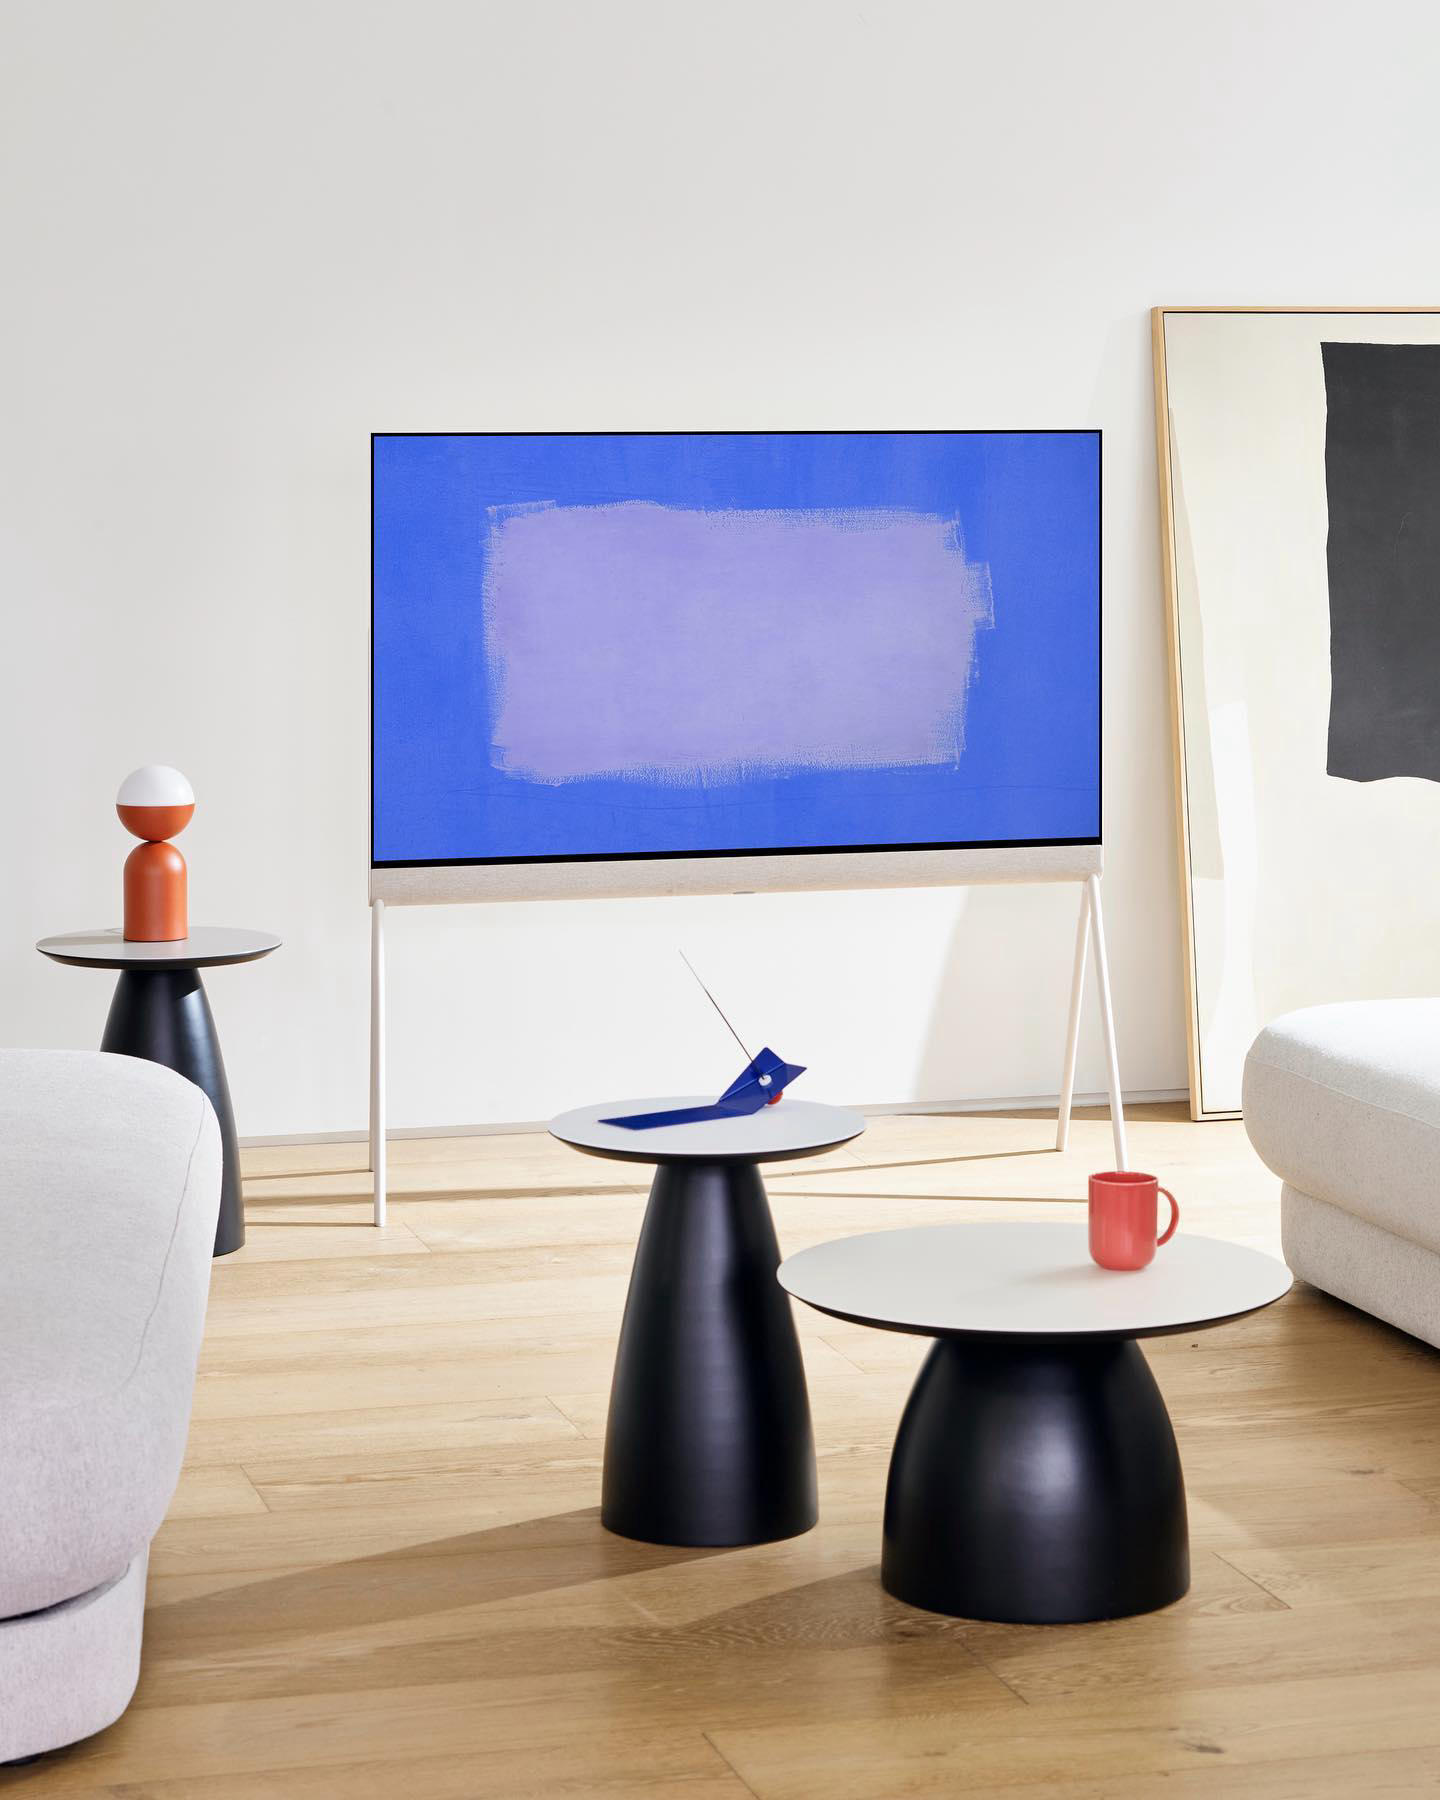 Art & Architecture - Meet the New LG OLED #lg_uk Objet collection Posé TV